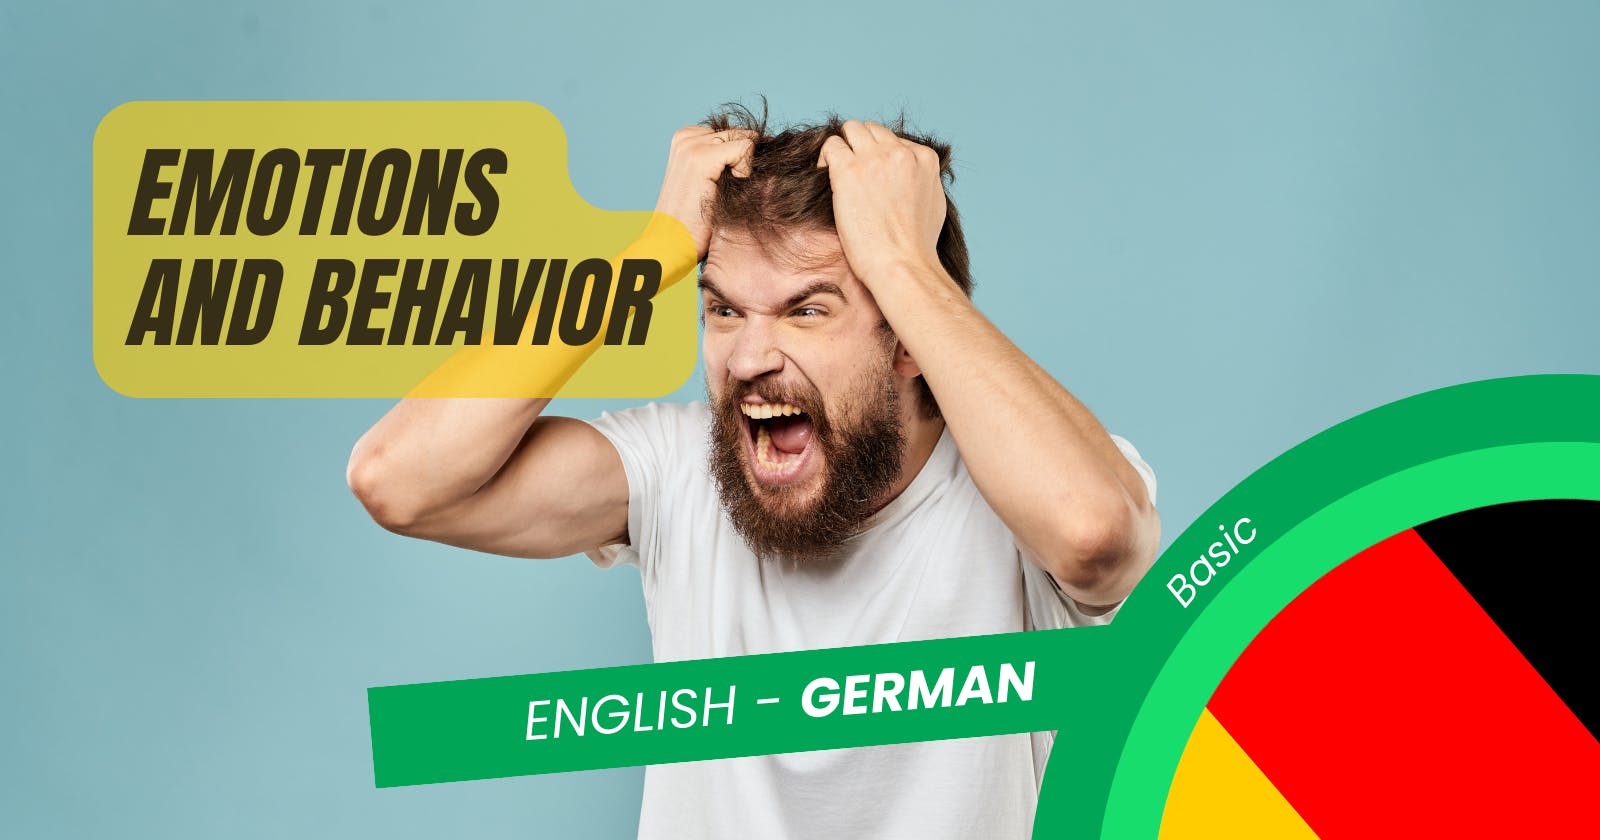 🇩🇪 Learn to Describe Feelings and Behaviors in Easy German